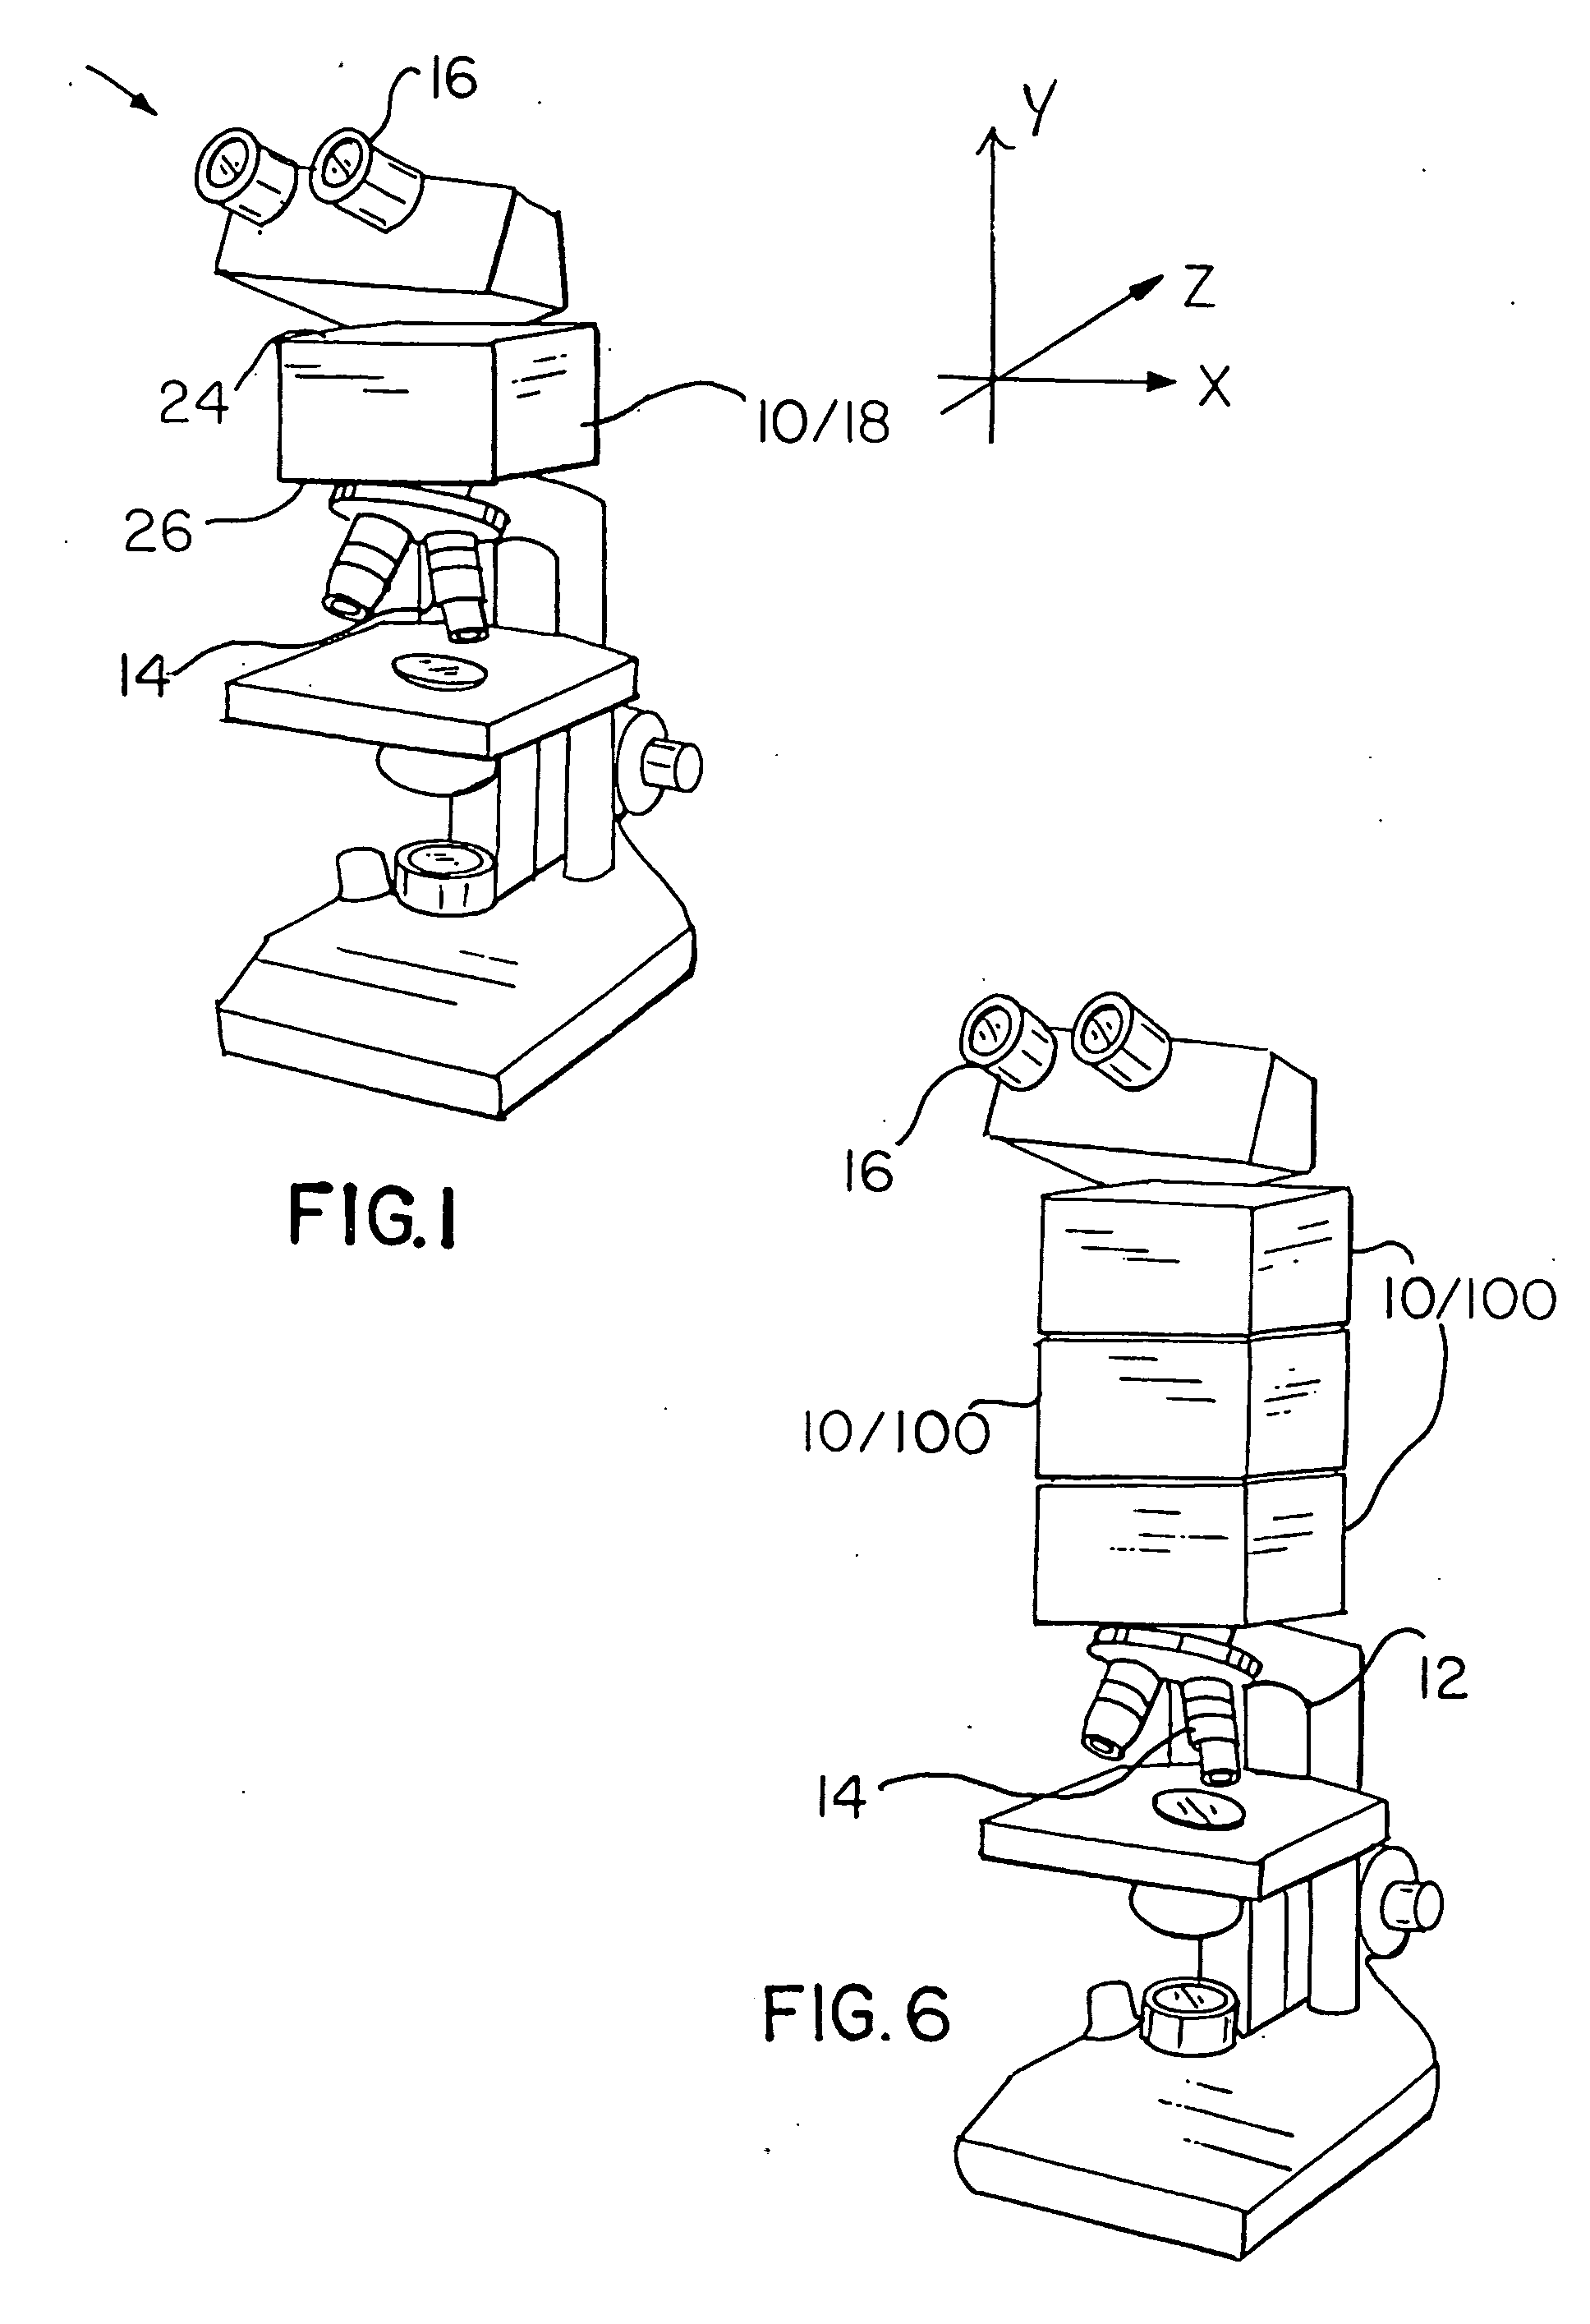 Optical module for increasing magnification of microscope